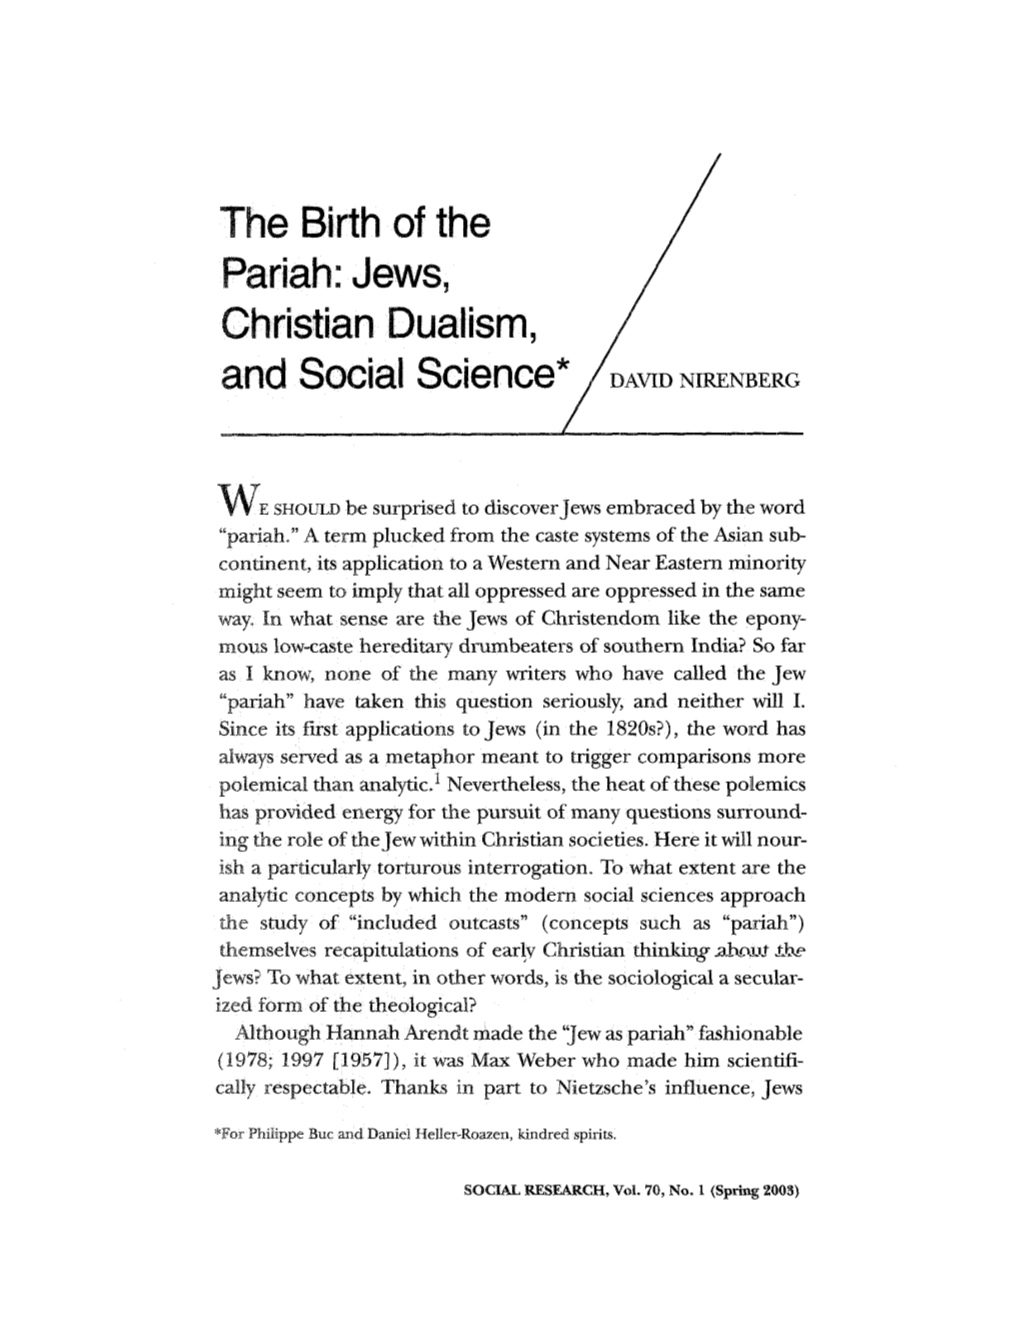 The Birth of the Pariah: Jews, Christian Dualism, and Social Science